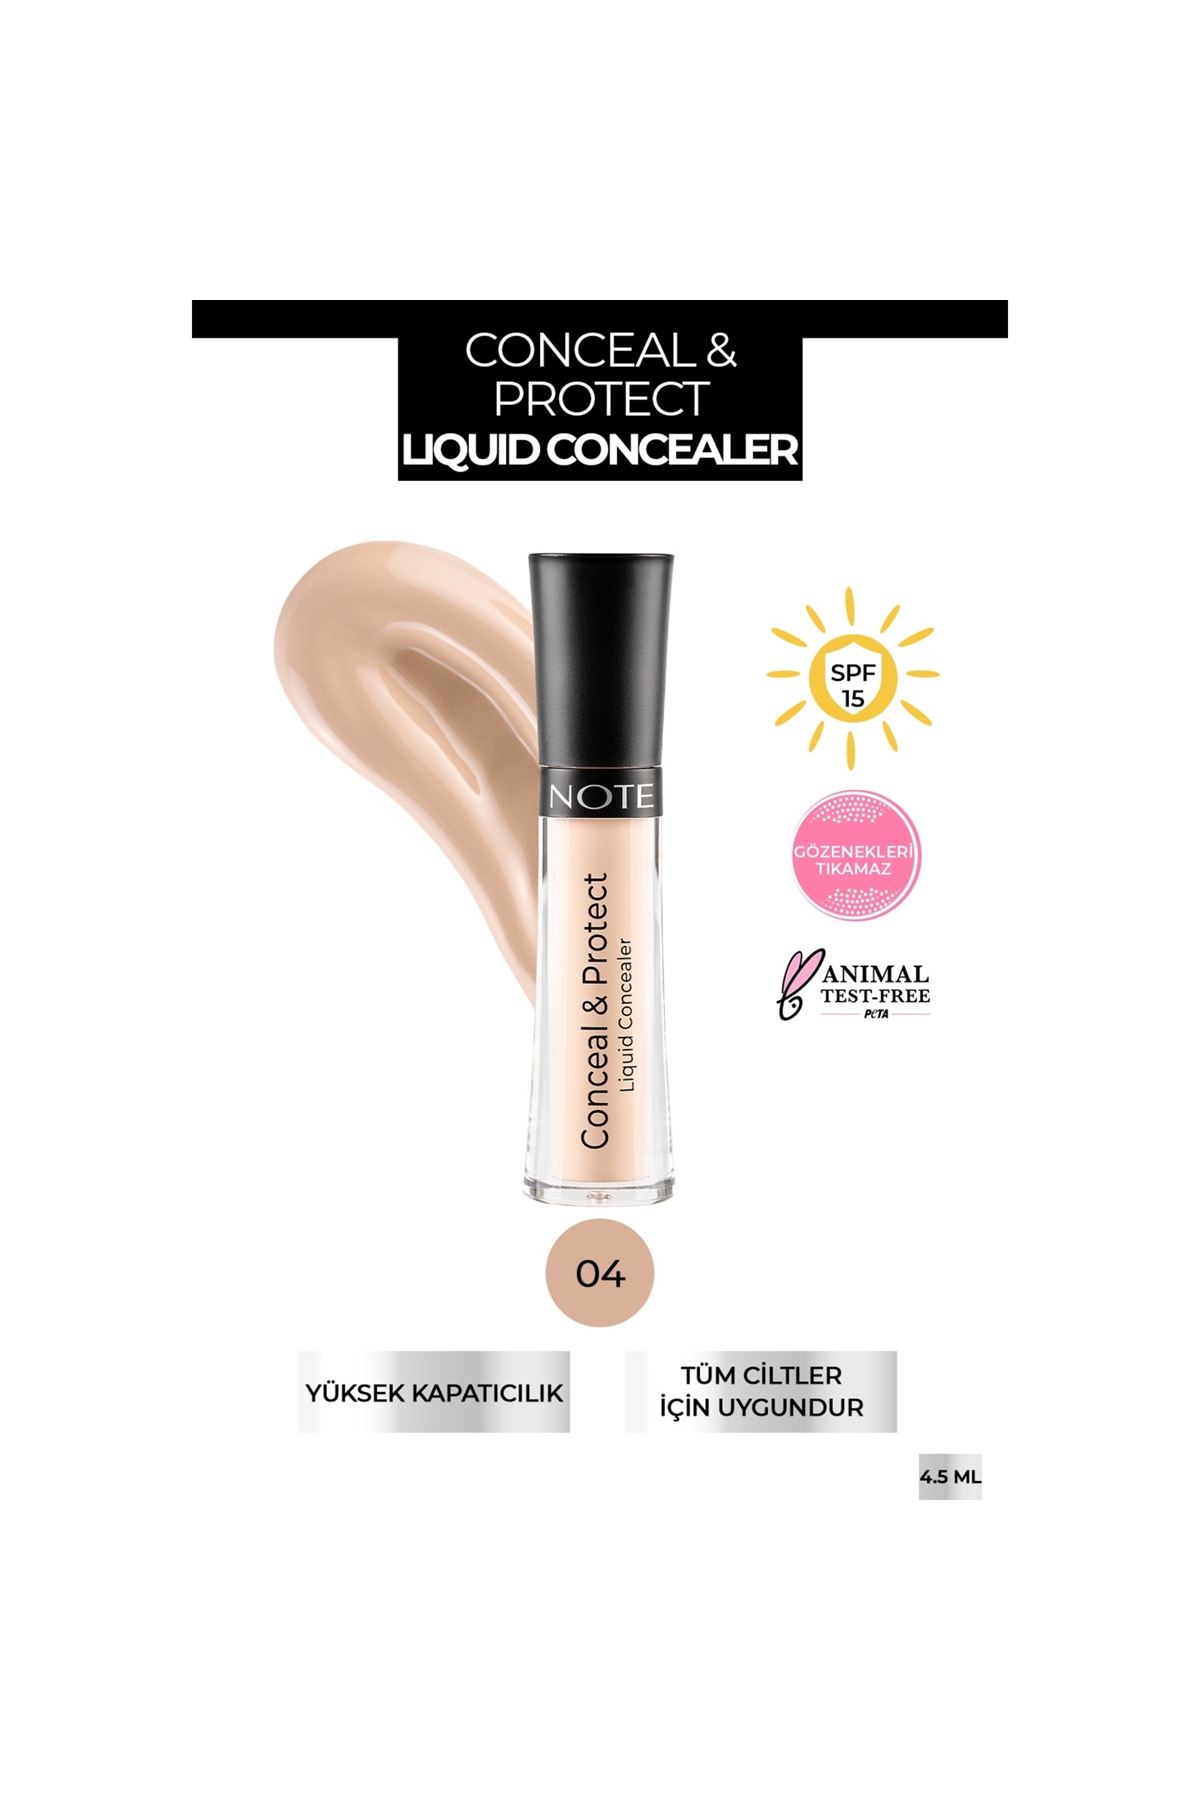 Note Conceal & Protect Likit Concealer - 04